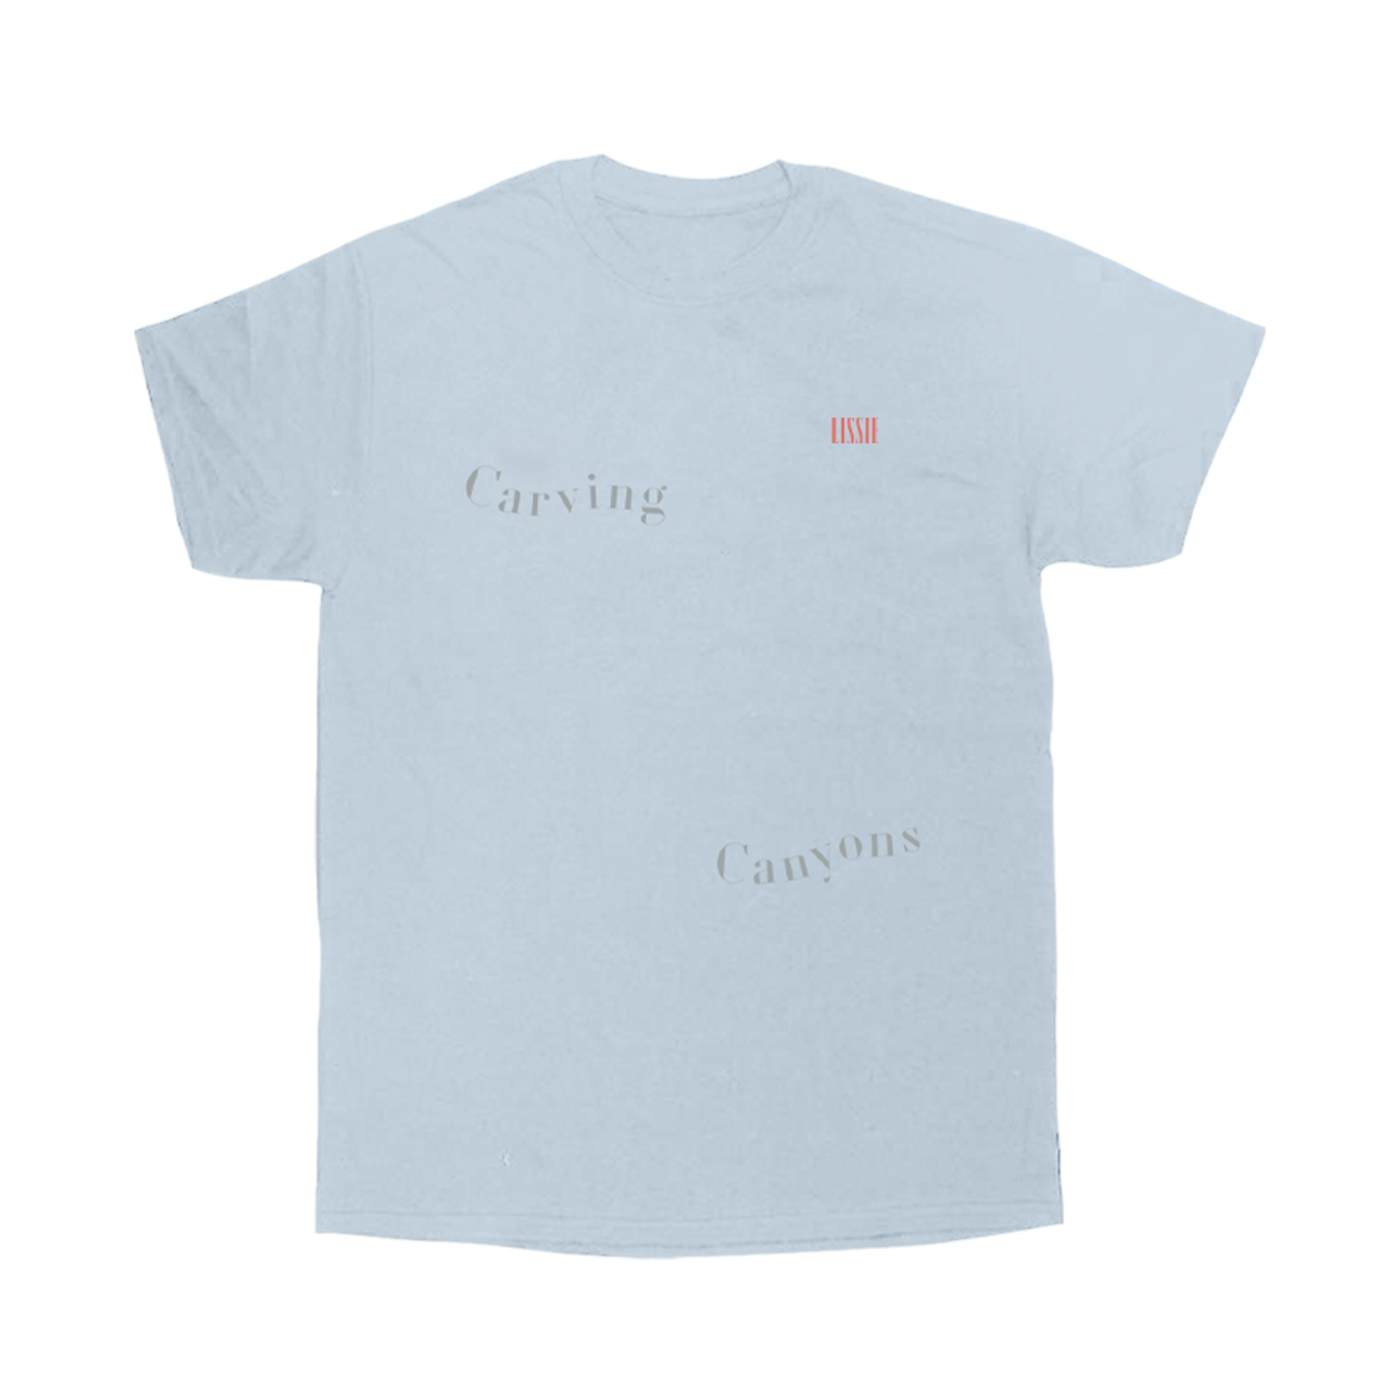 Lissie Carving Canyons  - Tee